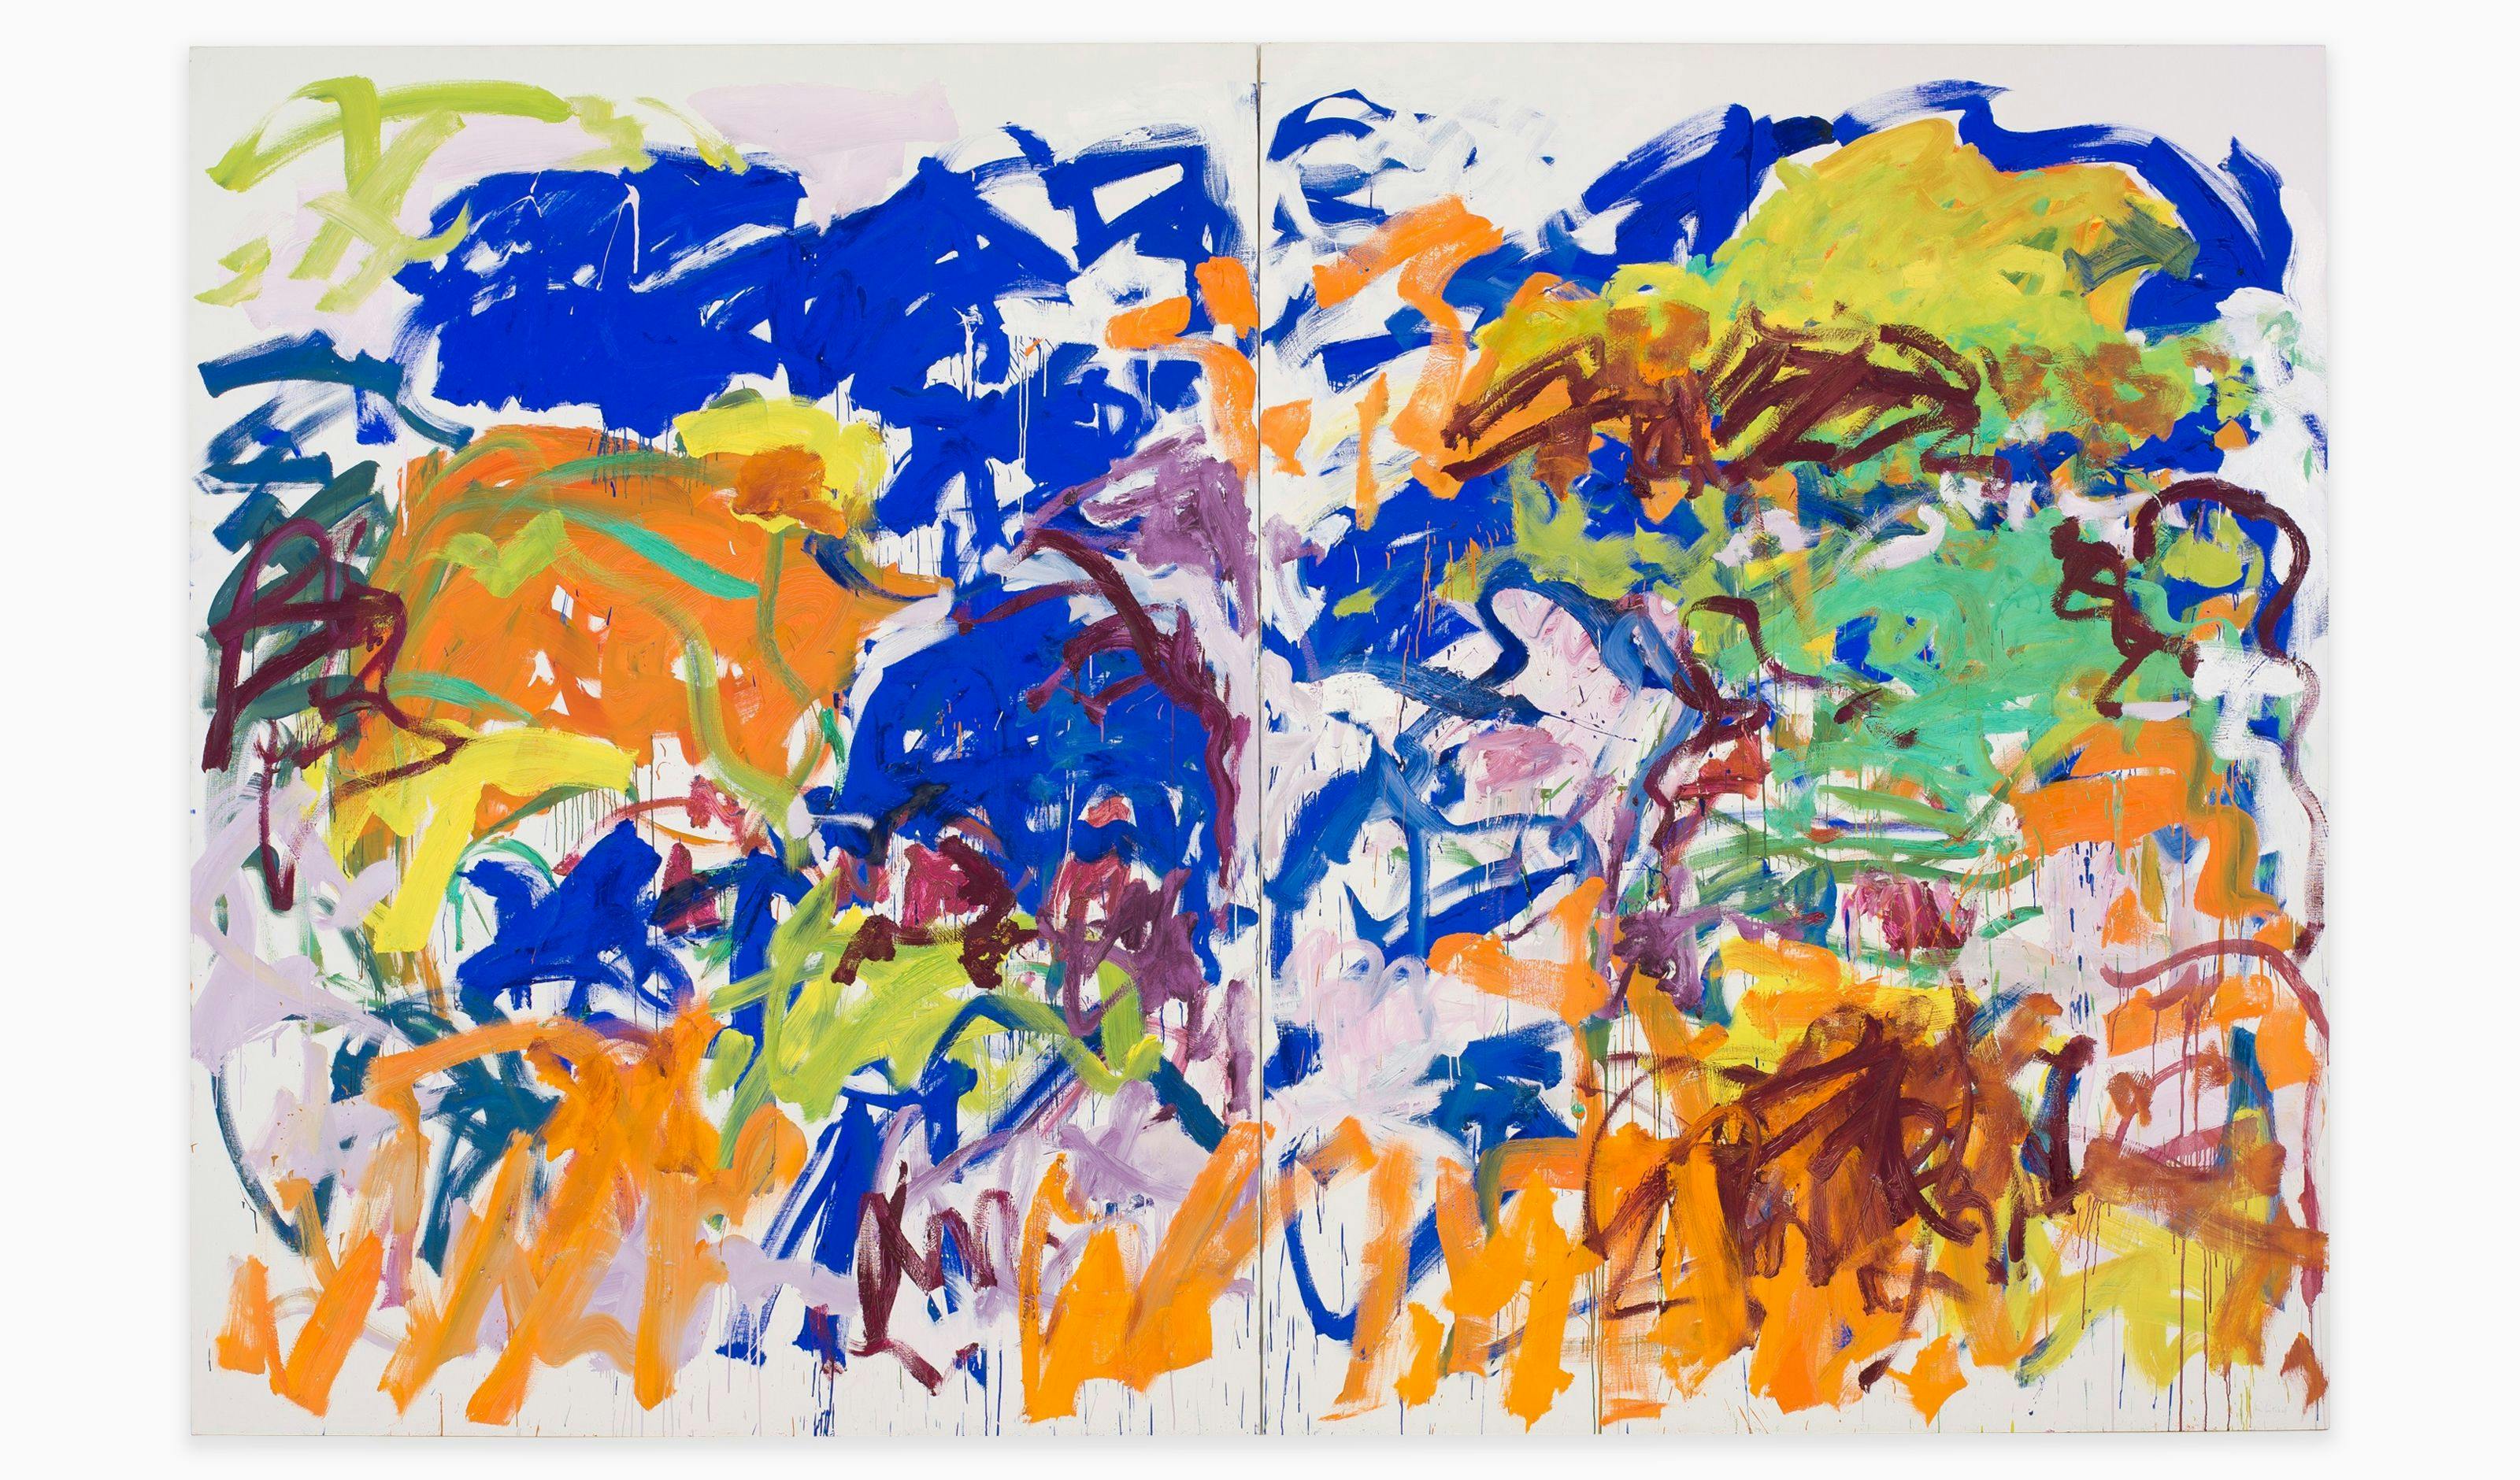 A painting by Joan Mitchell, titled Ici, dated 1992.